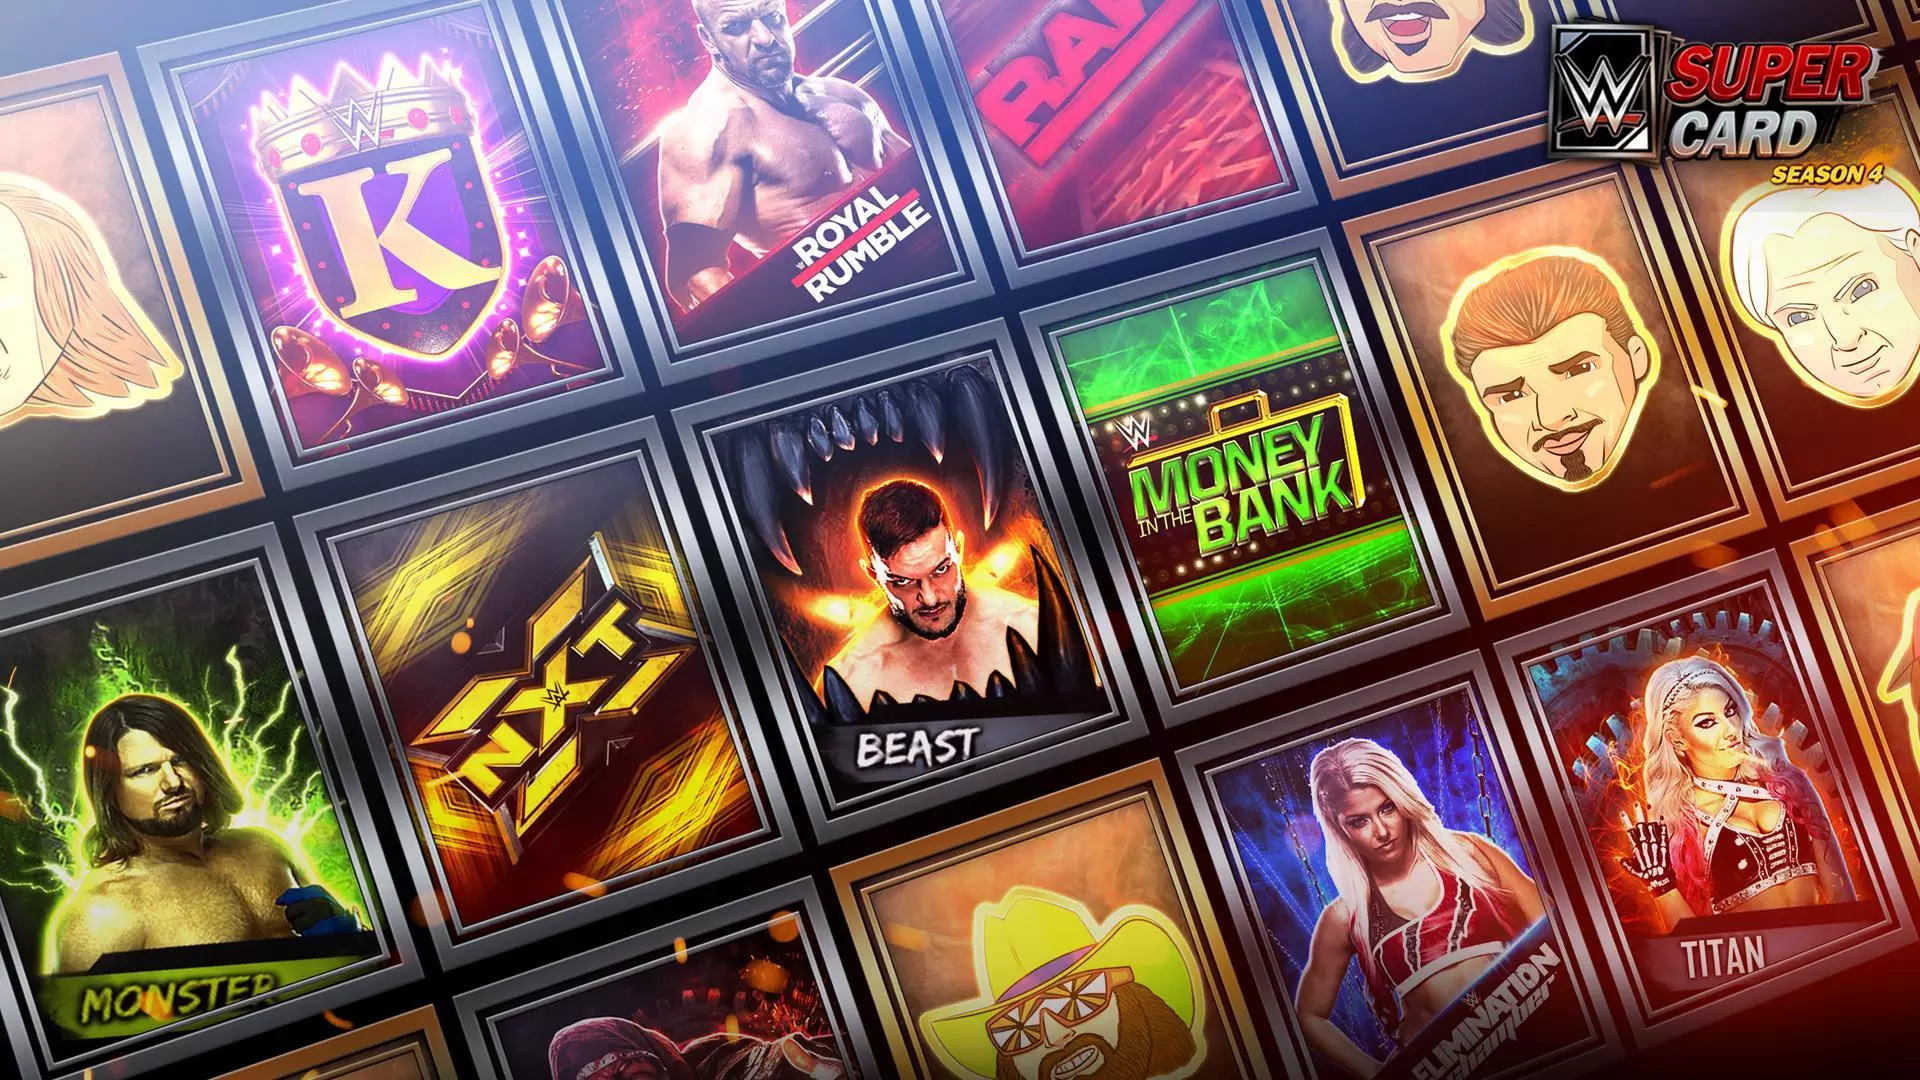 WWE SuperCard Season 4 Available Today! Features Overview, Launch Trailer & Screenshots